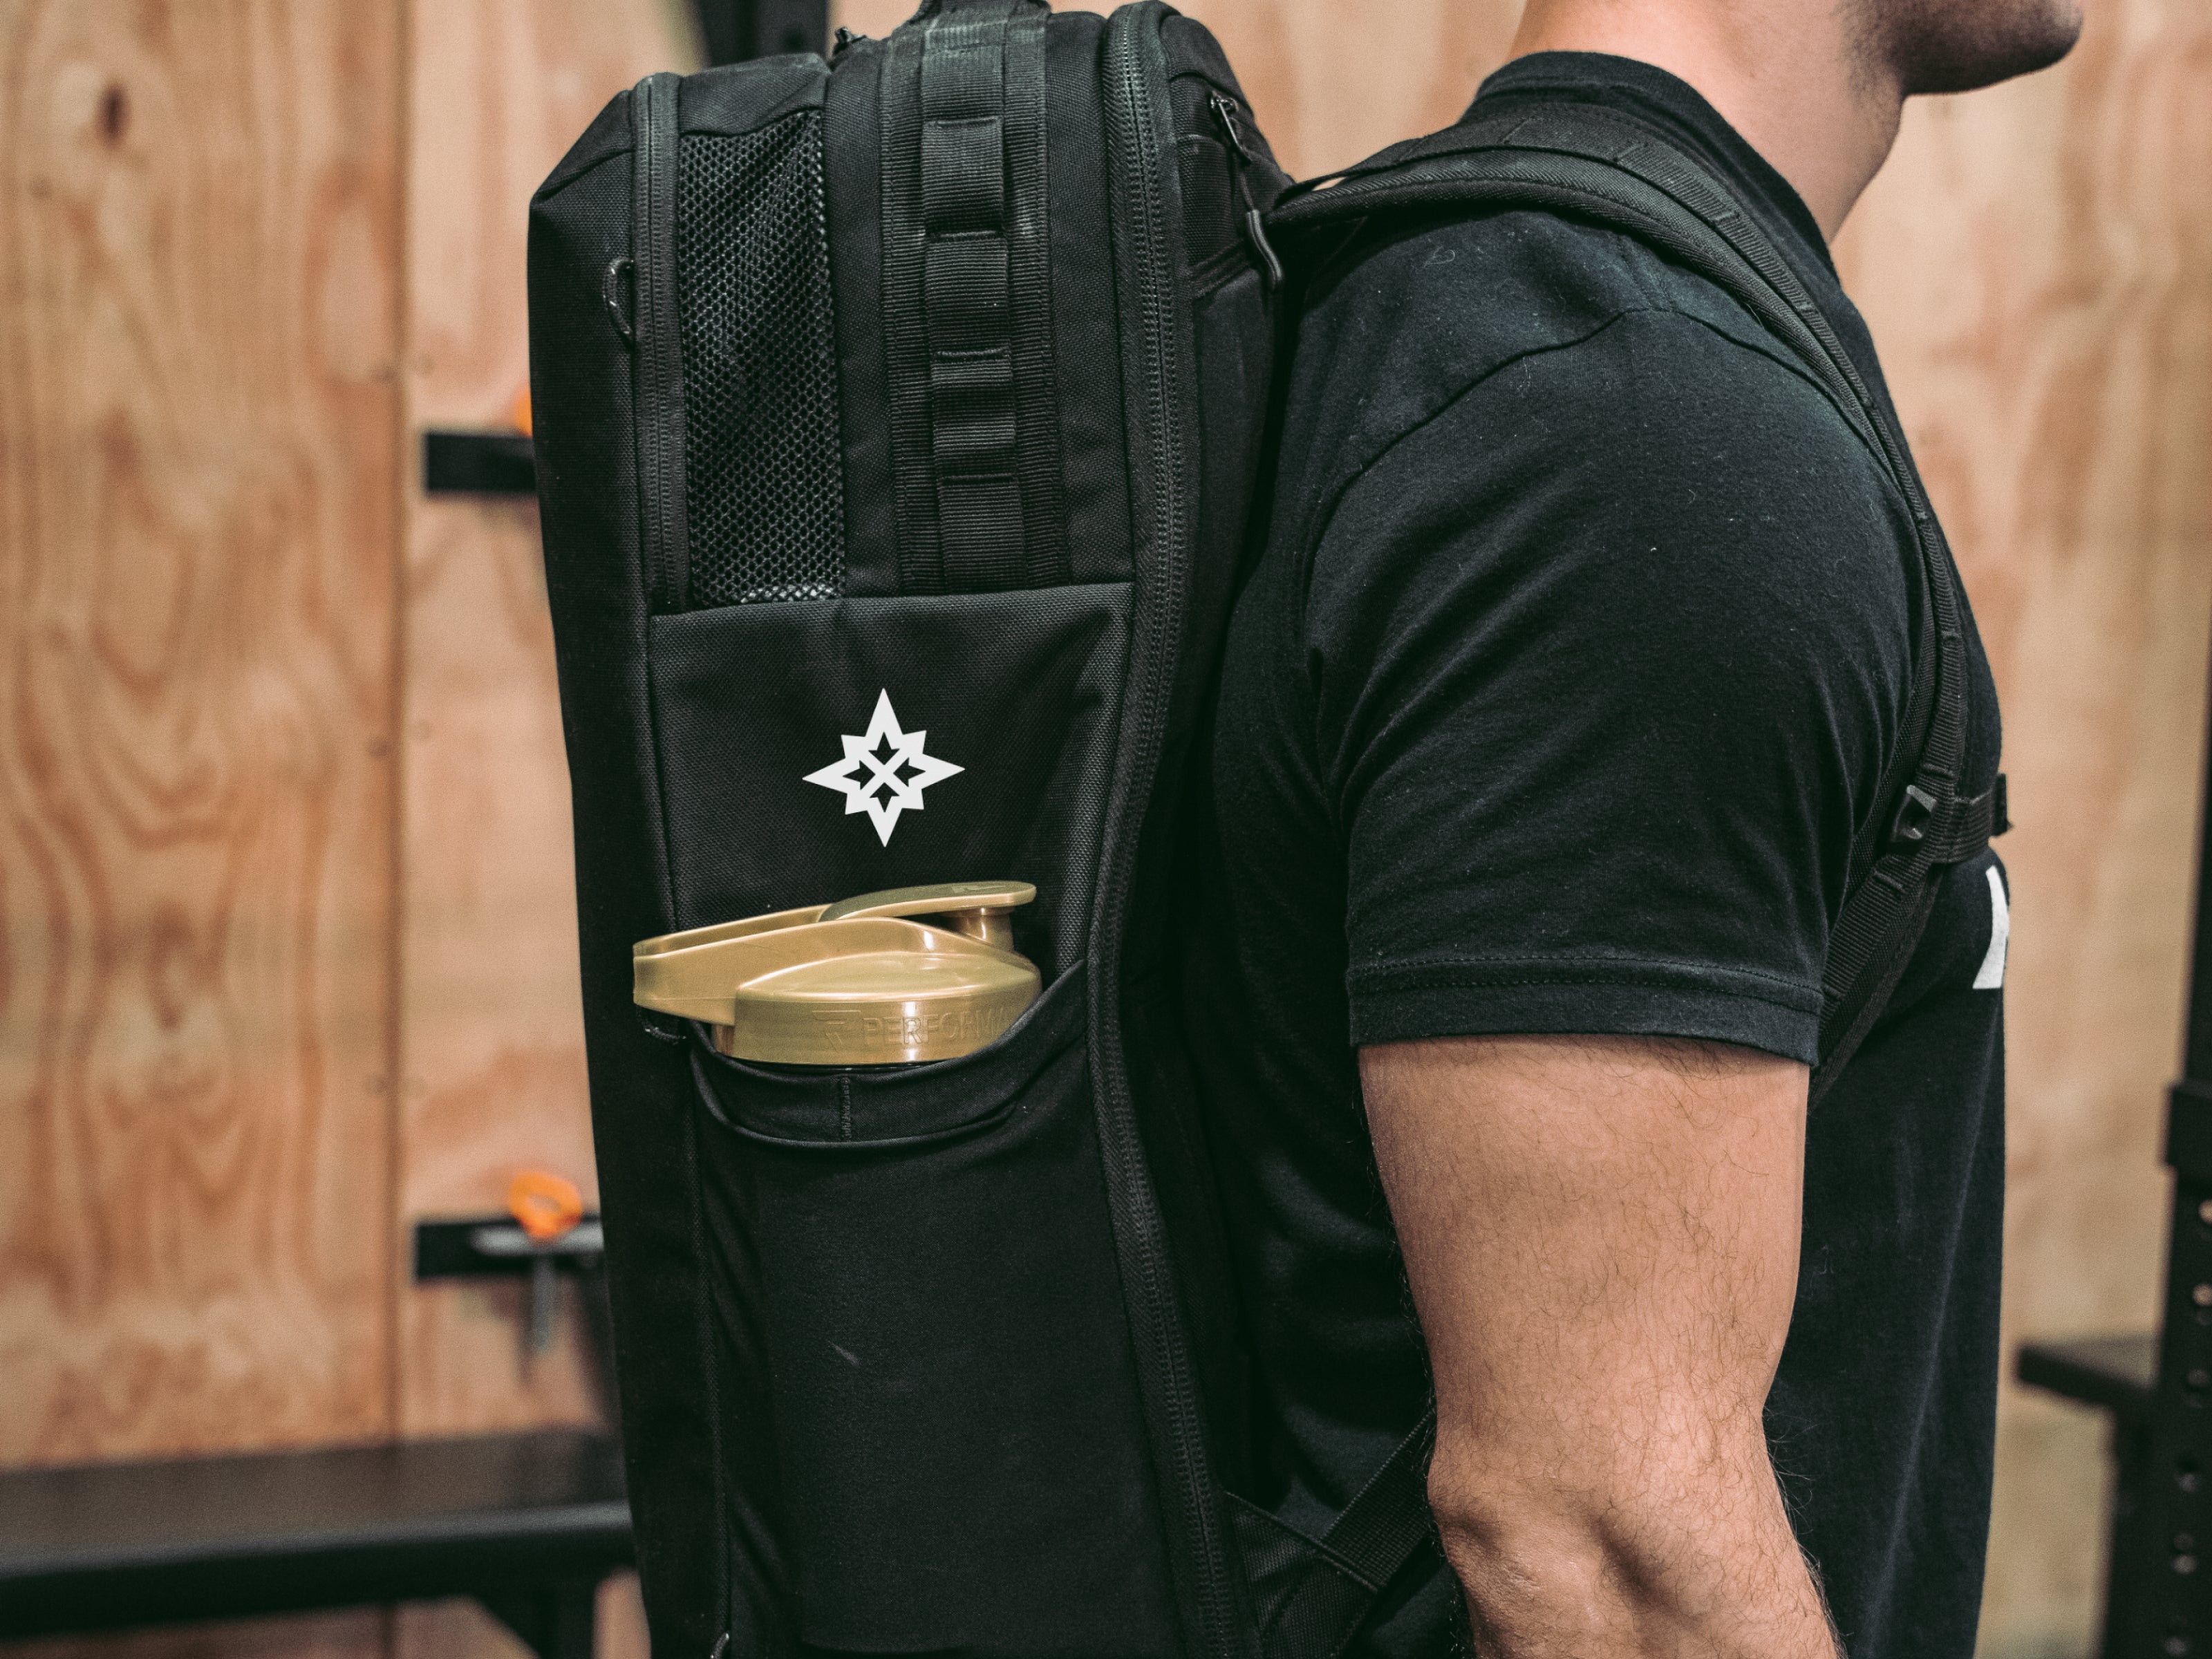 Built for the adventure, this CrossFit backpack stands up to the unknowable  thanks to durable CORDURA® fabric. Securely stow ever…